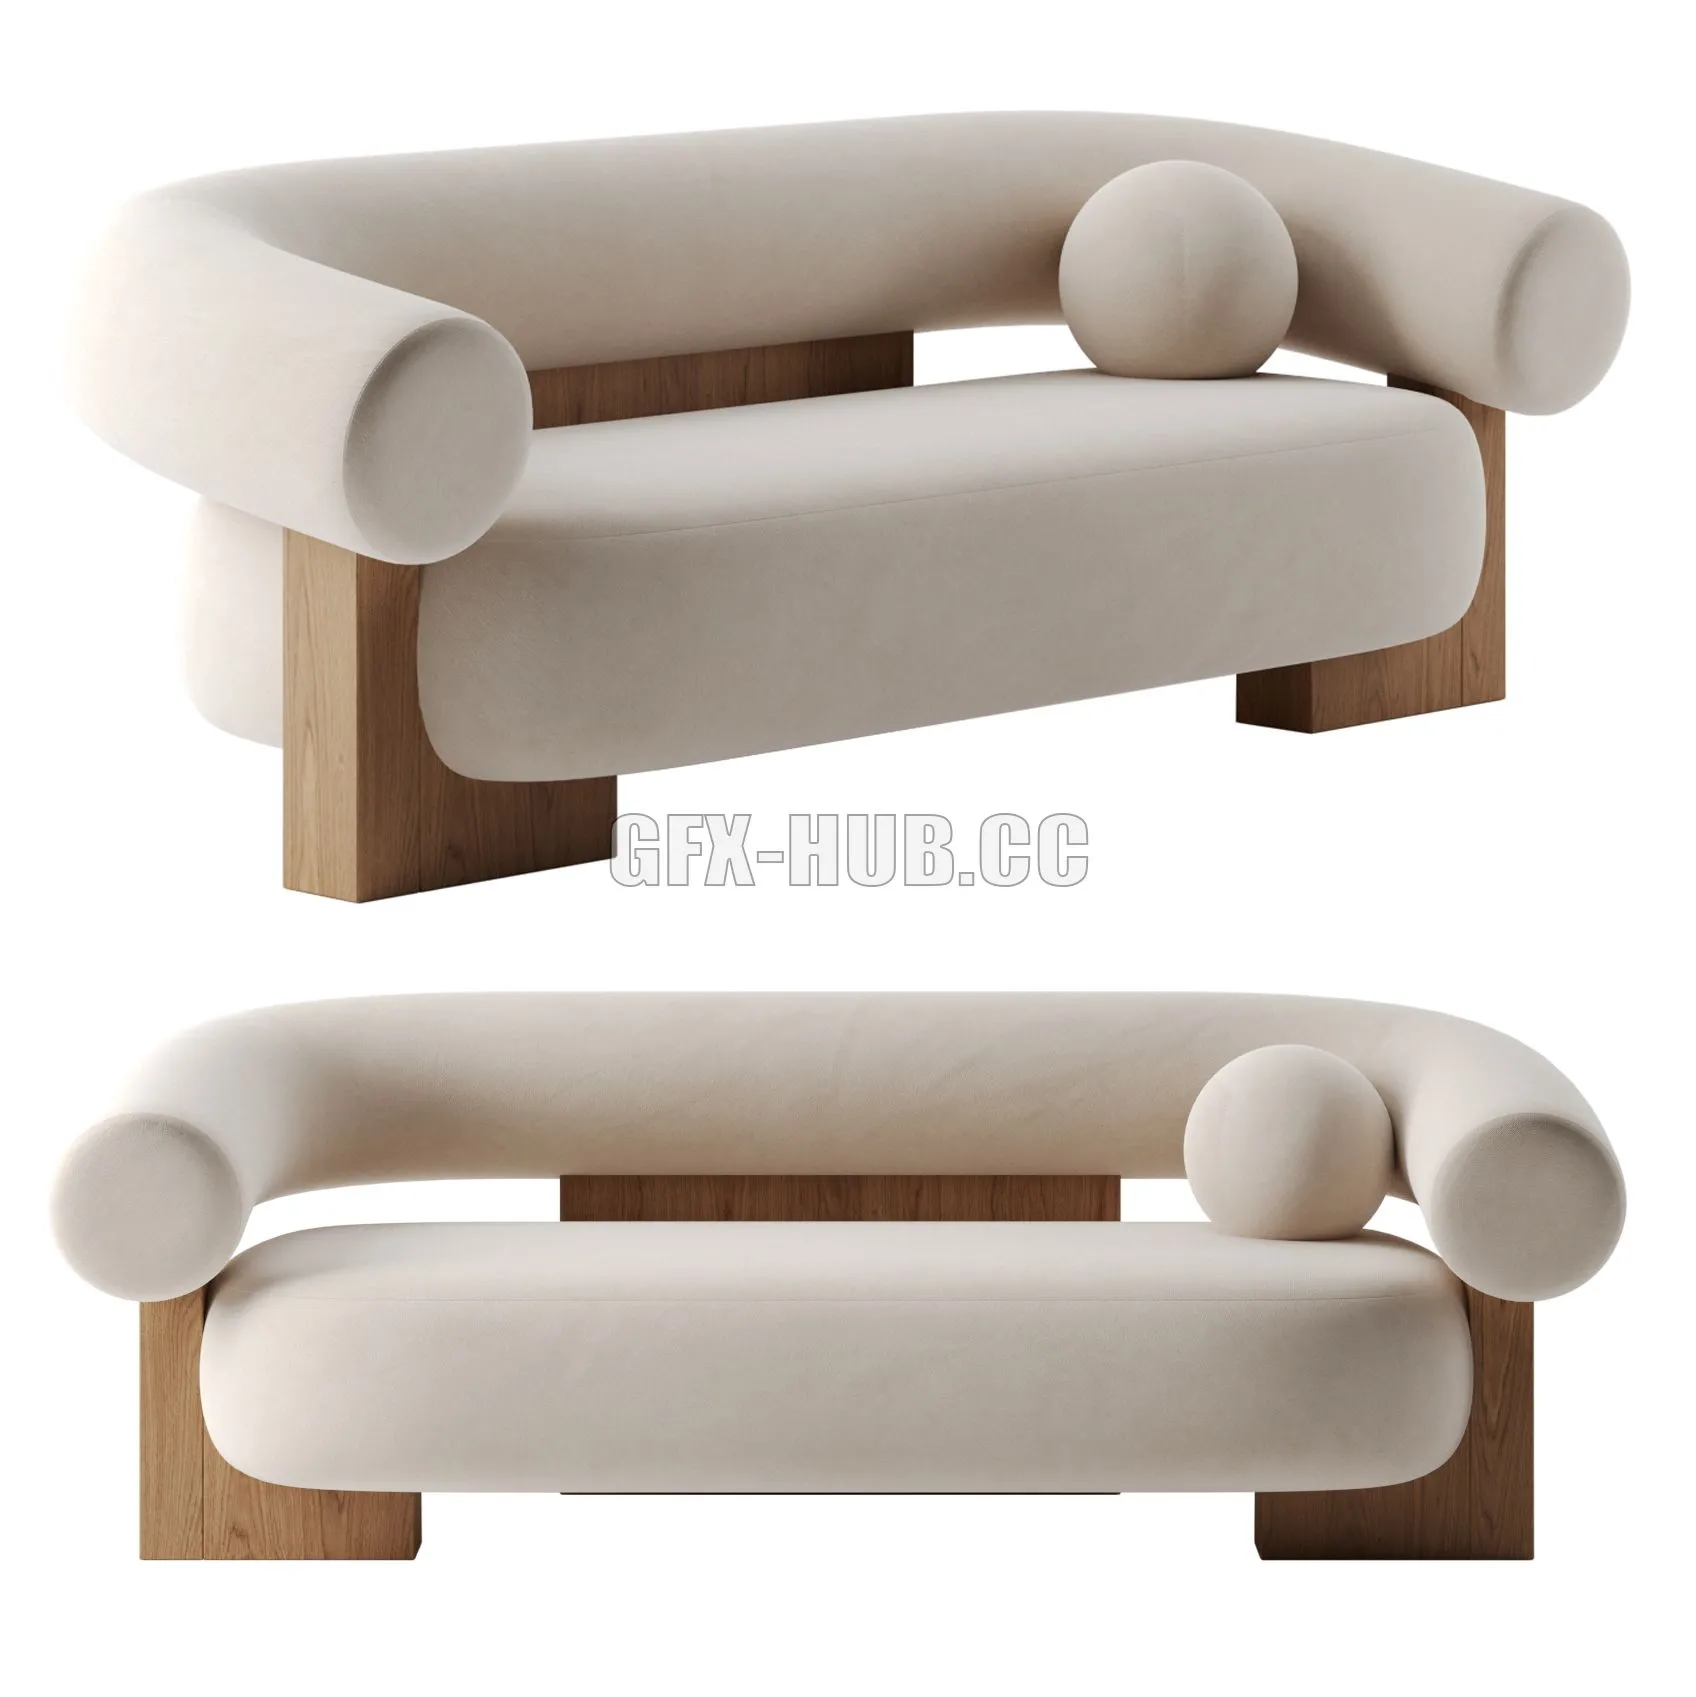 FURNITURE 3D MODELS – Cassete Sofa by Collector